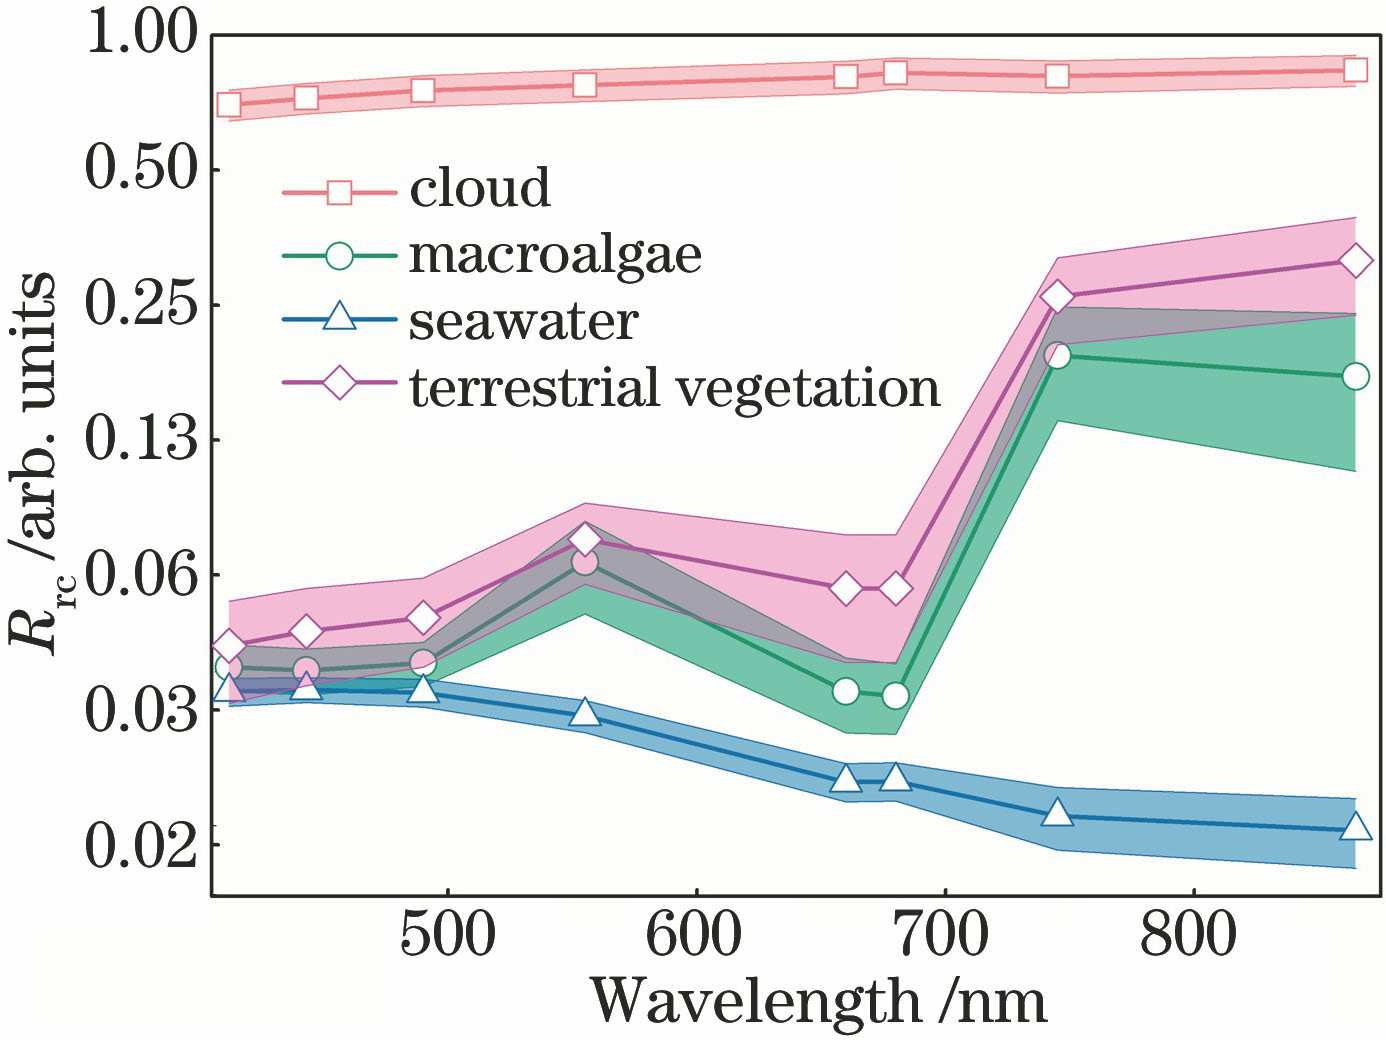 Mean value (solid line) and standard deviation (shadow) of Rayleigh-corrected reflectance spectra of macroalgae, seawater, terrestrial vegetation, and cloud pixels